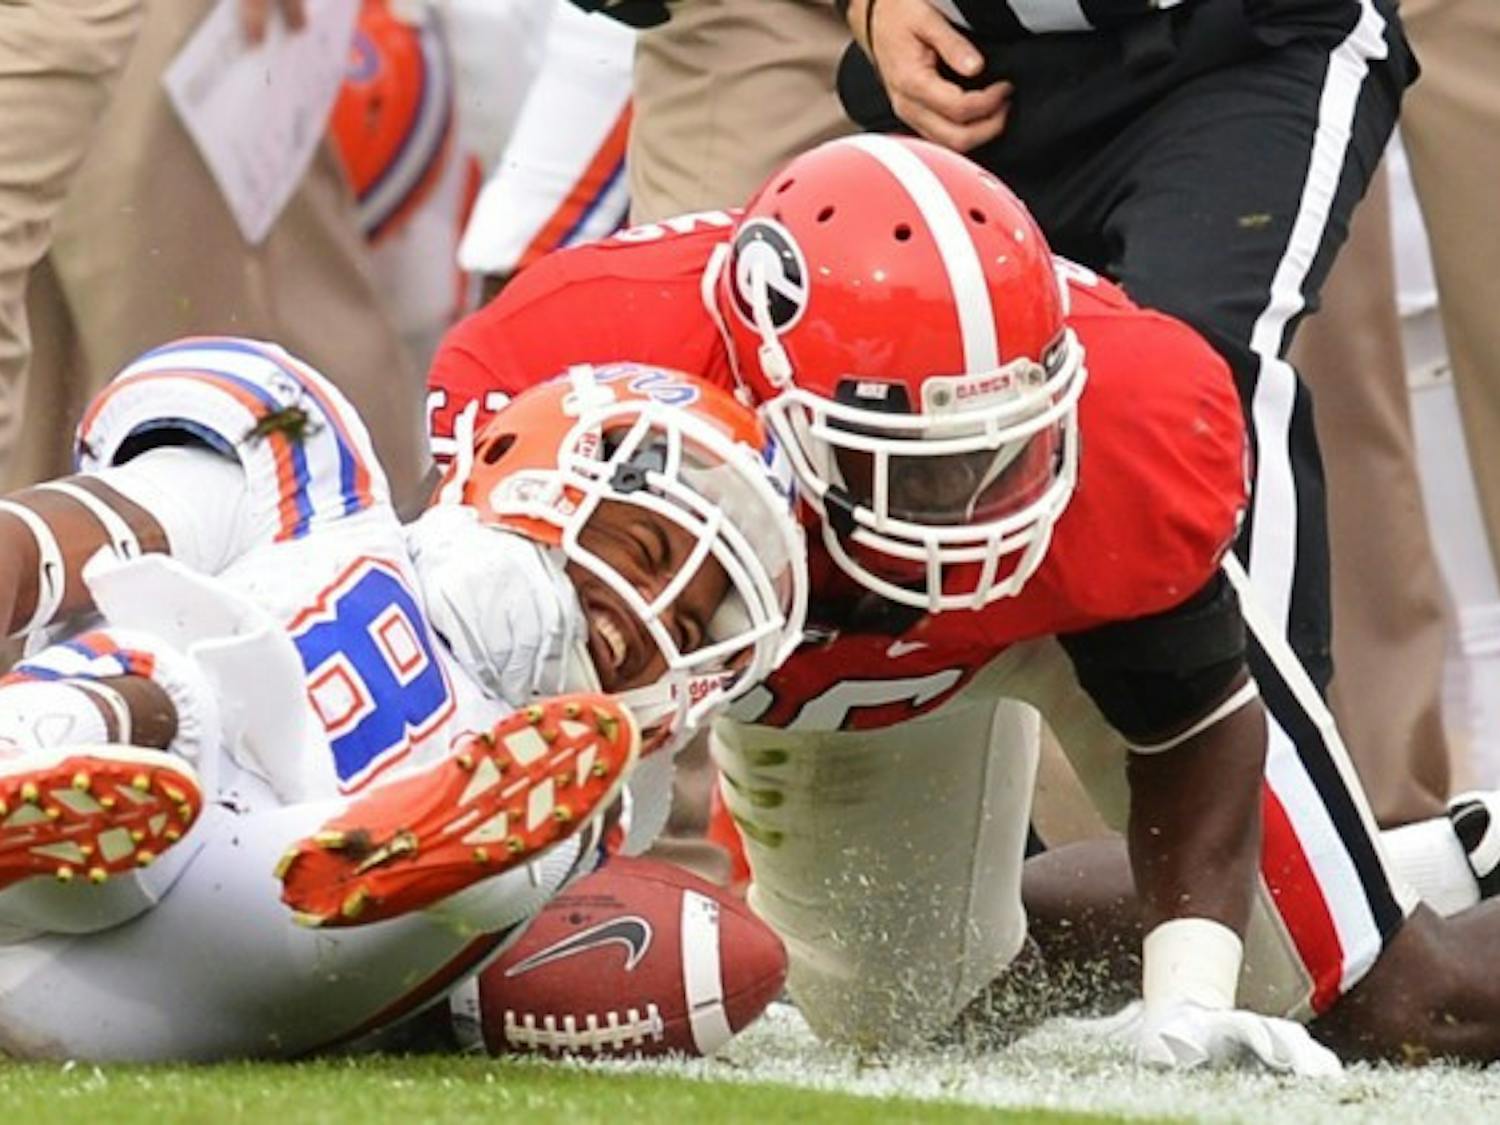 Junior Solomon Patton is tackled by Georgia safety Shawn Williams during UF's 17-9 loss on Saturday at EverBank Field. Patton suffered a broken left arm on the play.&nbsp;
